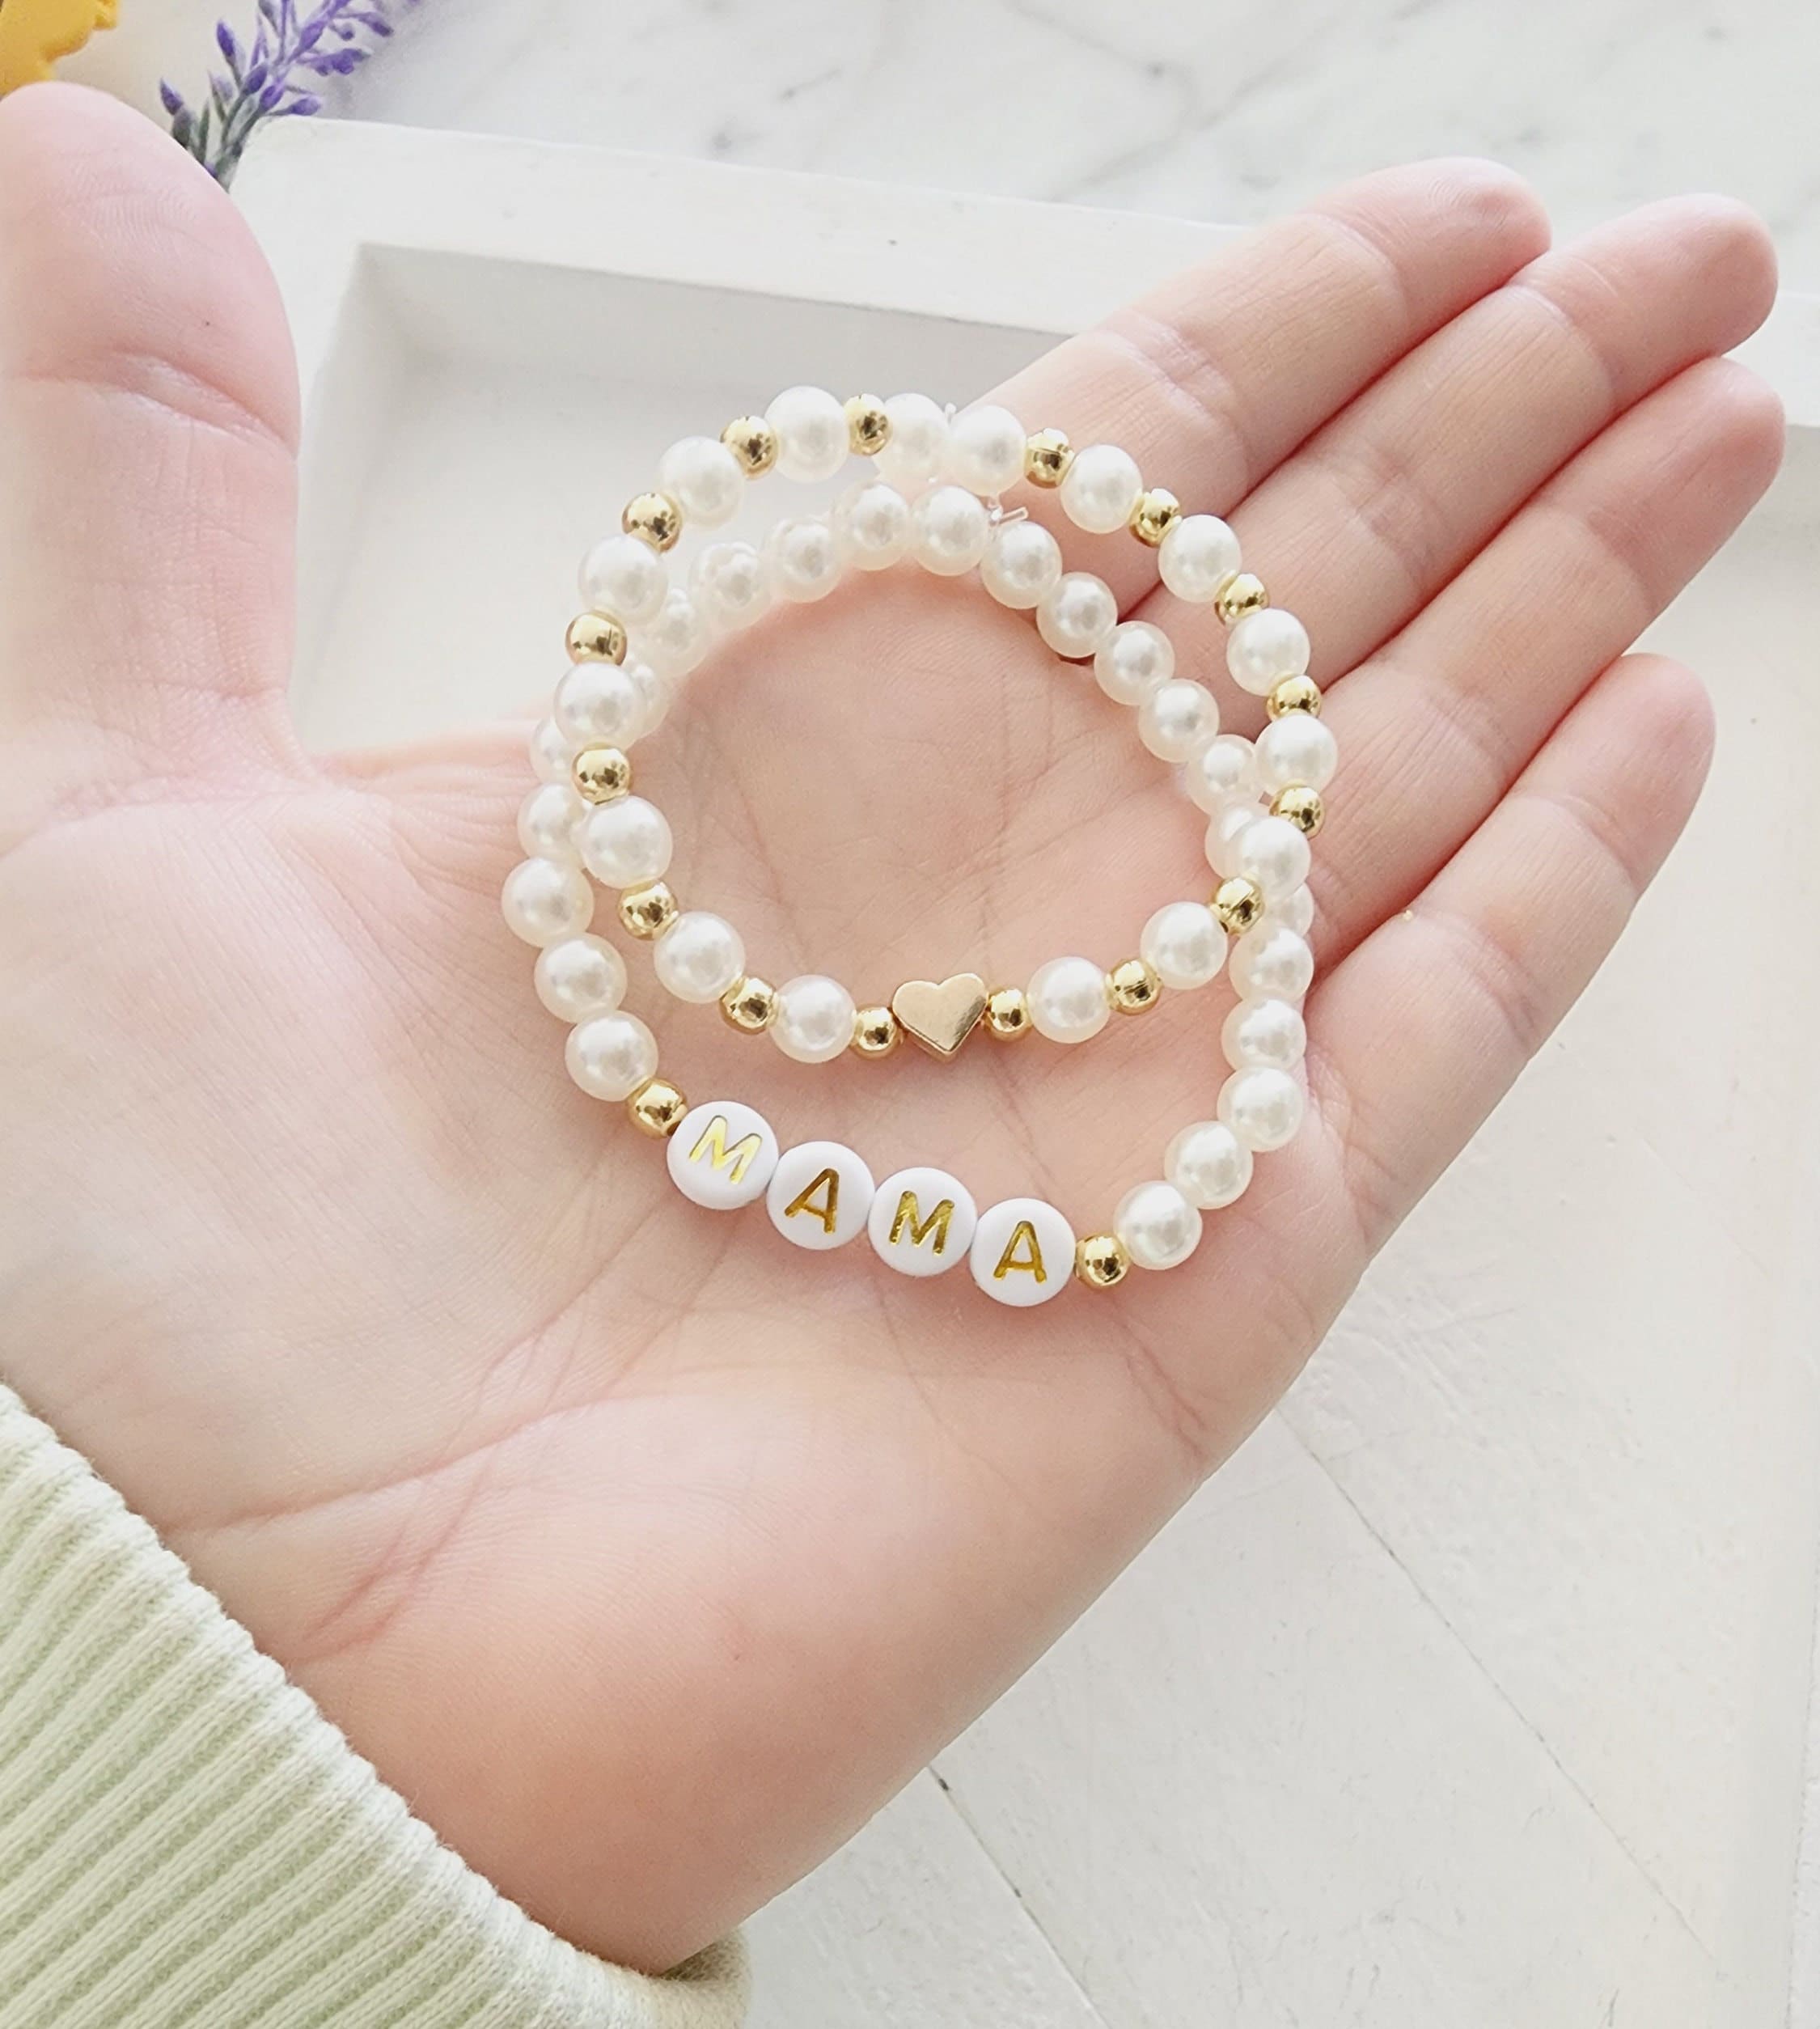 How to Make a Handmade White Pearl Bead Bracelet with Bead Flower Decorated  from LC.Pandahall.com | Beaded bracelets, Bead jewellery, Jewelry patterns